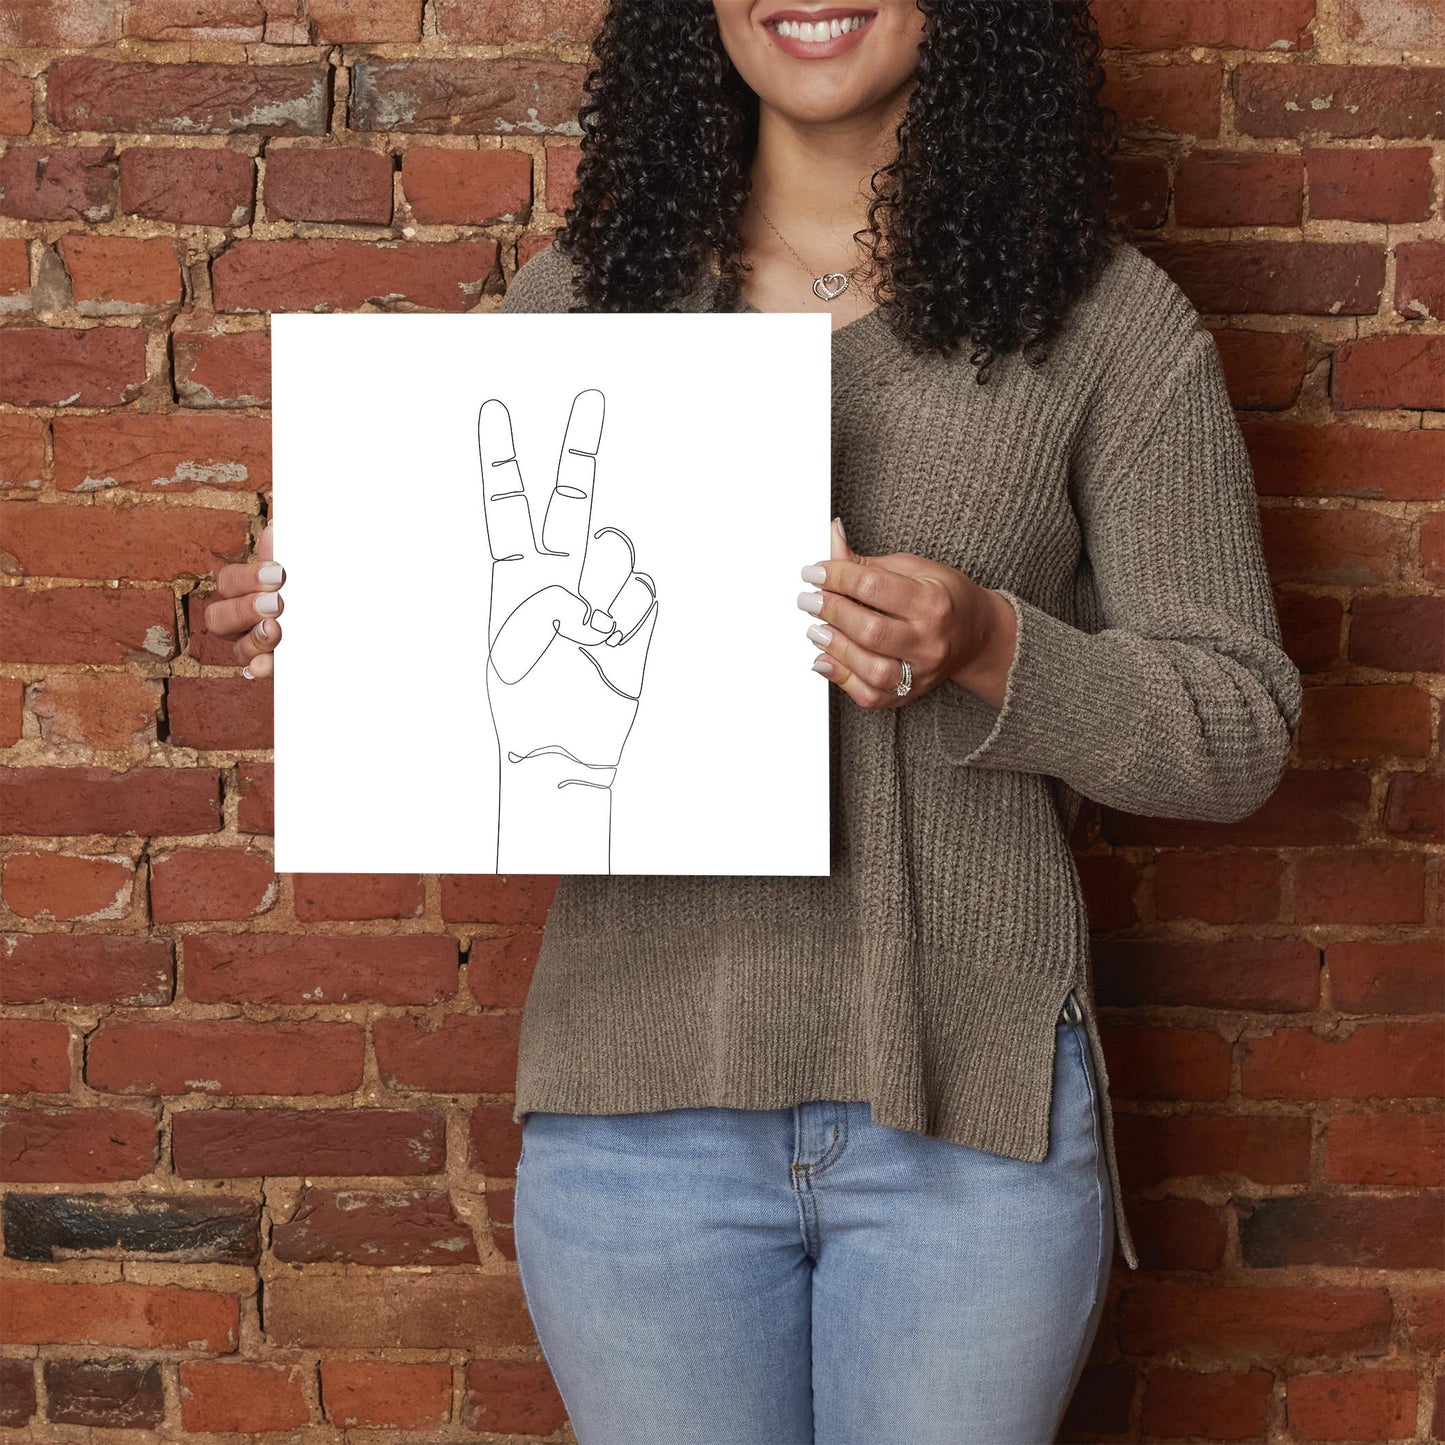 Peace Hand Sign Line Drawing | Hi-Def Glass Art | Eaches | Min 1